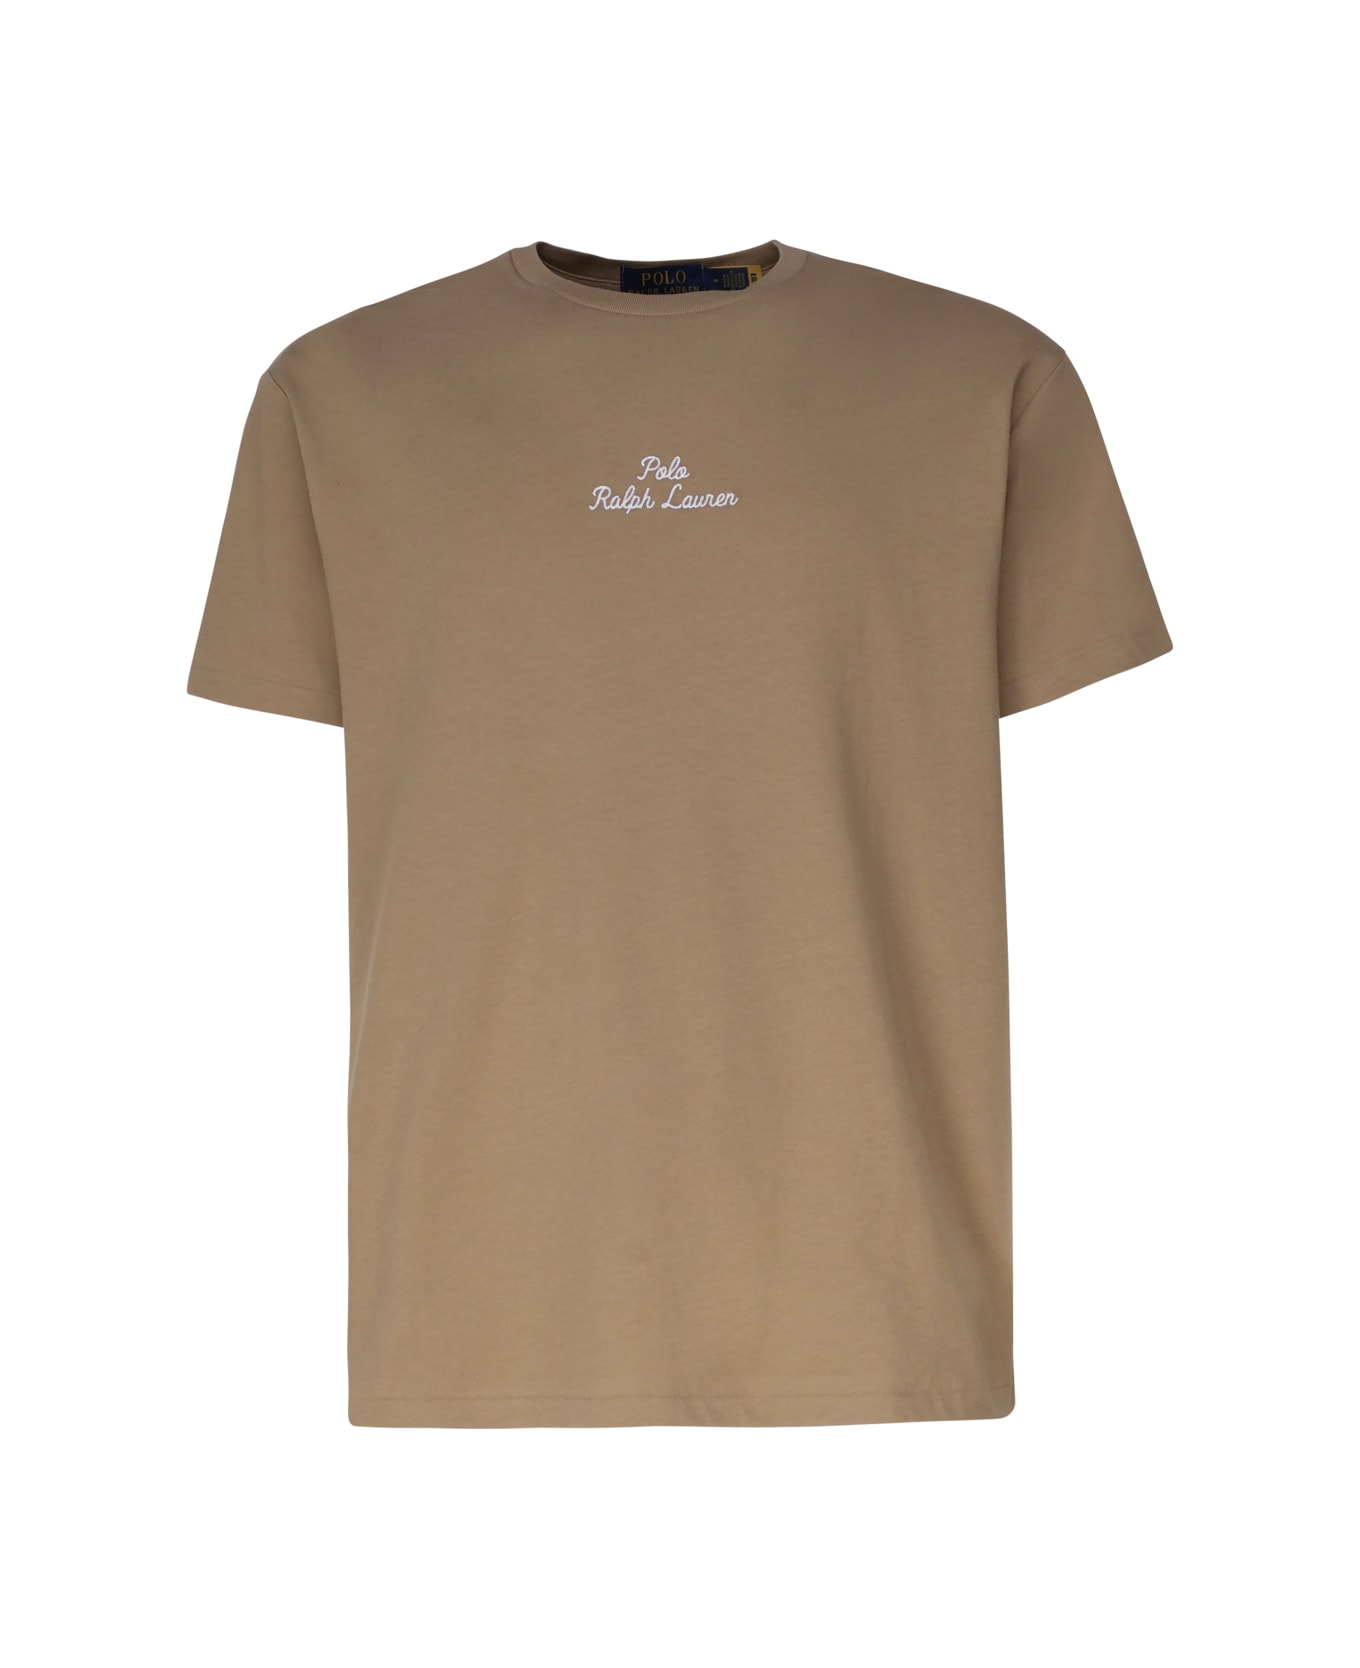 Polo Ralph Lauren T-shirt With Embroidery - Khaki